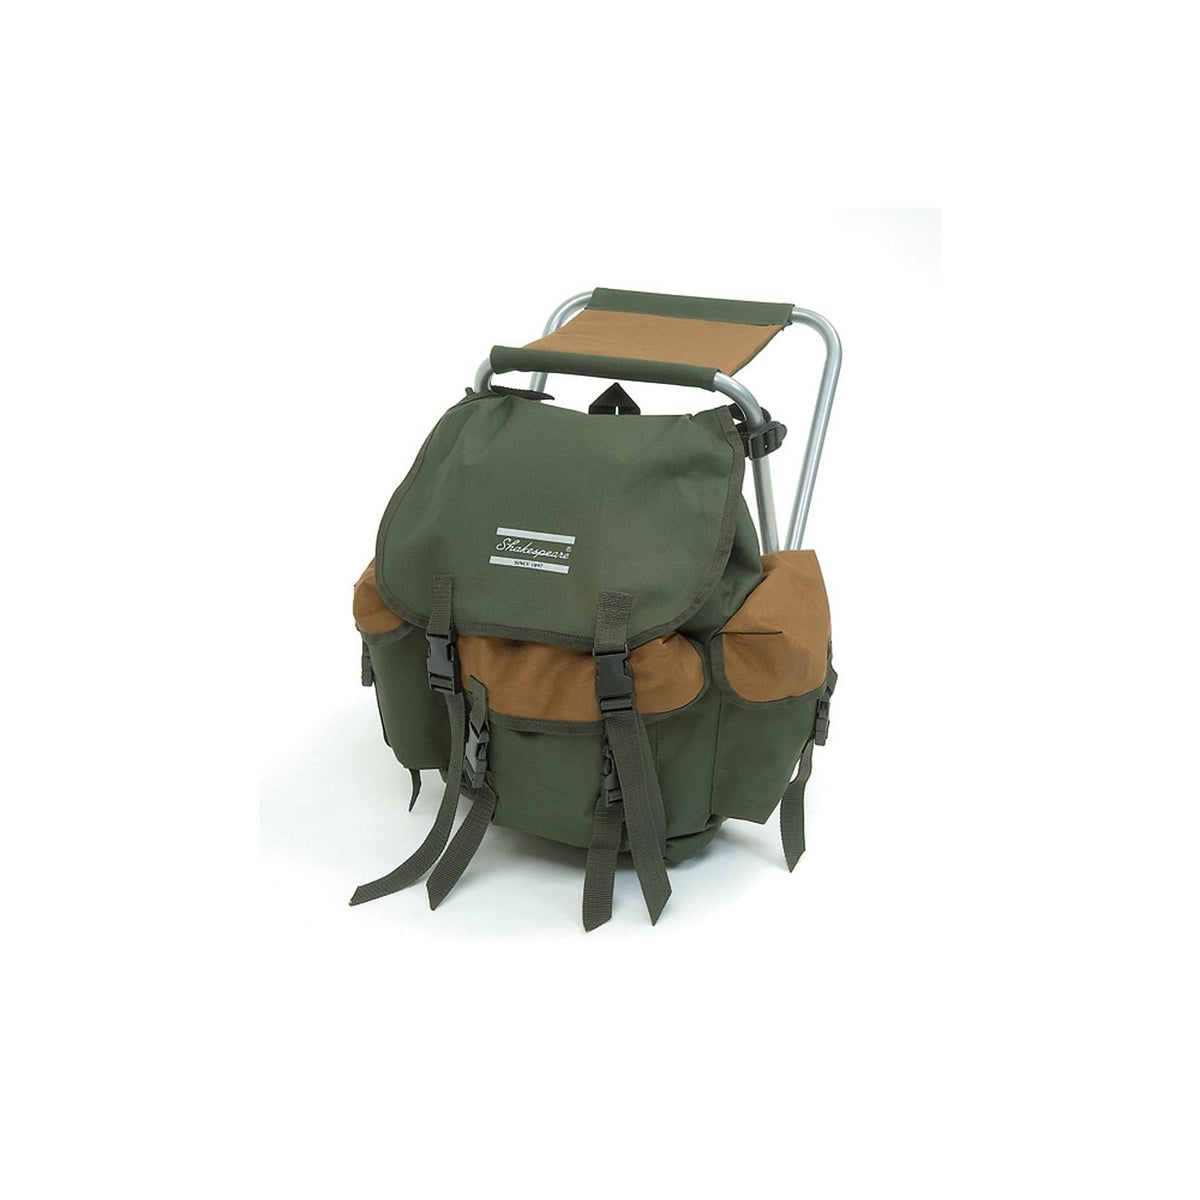 Shakespeare Folding Stool with Backpack - Lightweight - 1.8kg